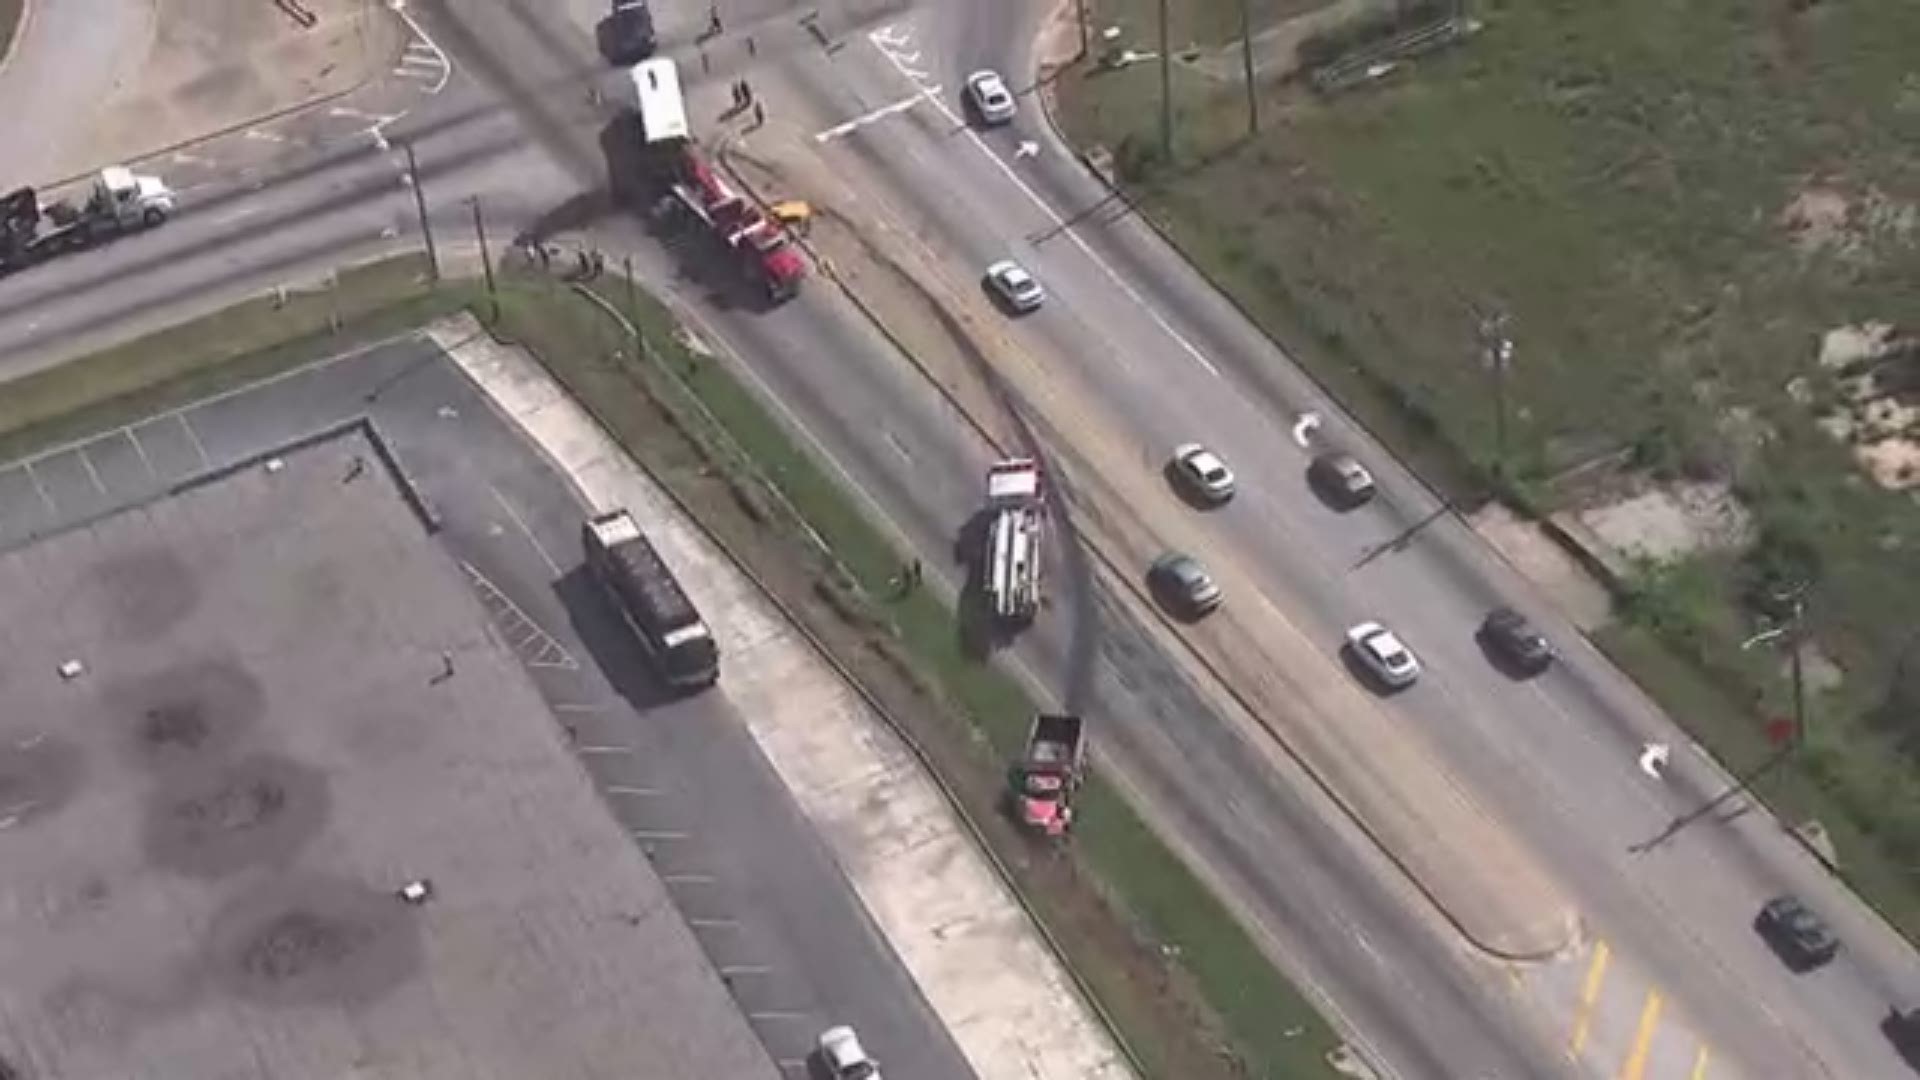 The 11Alive SkyTracker flew over the scene.